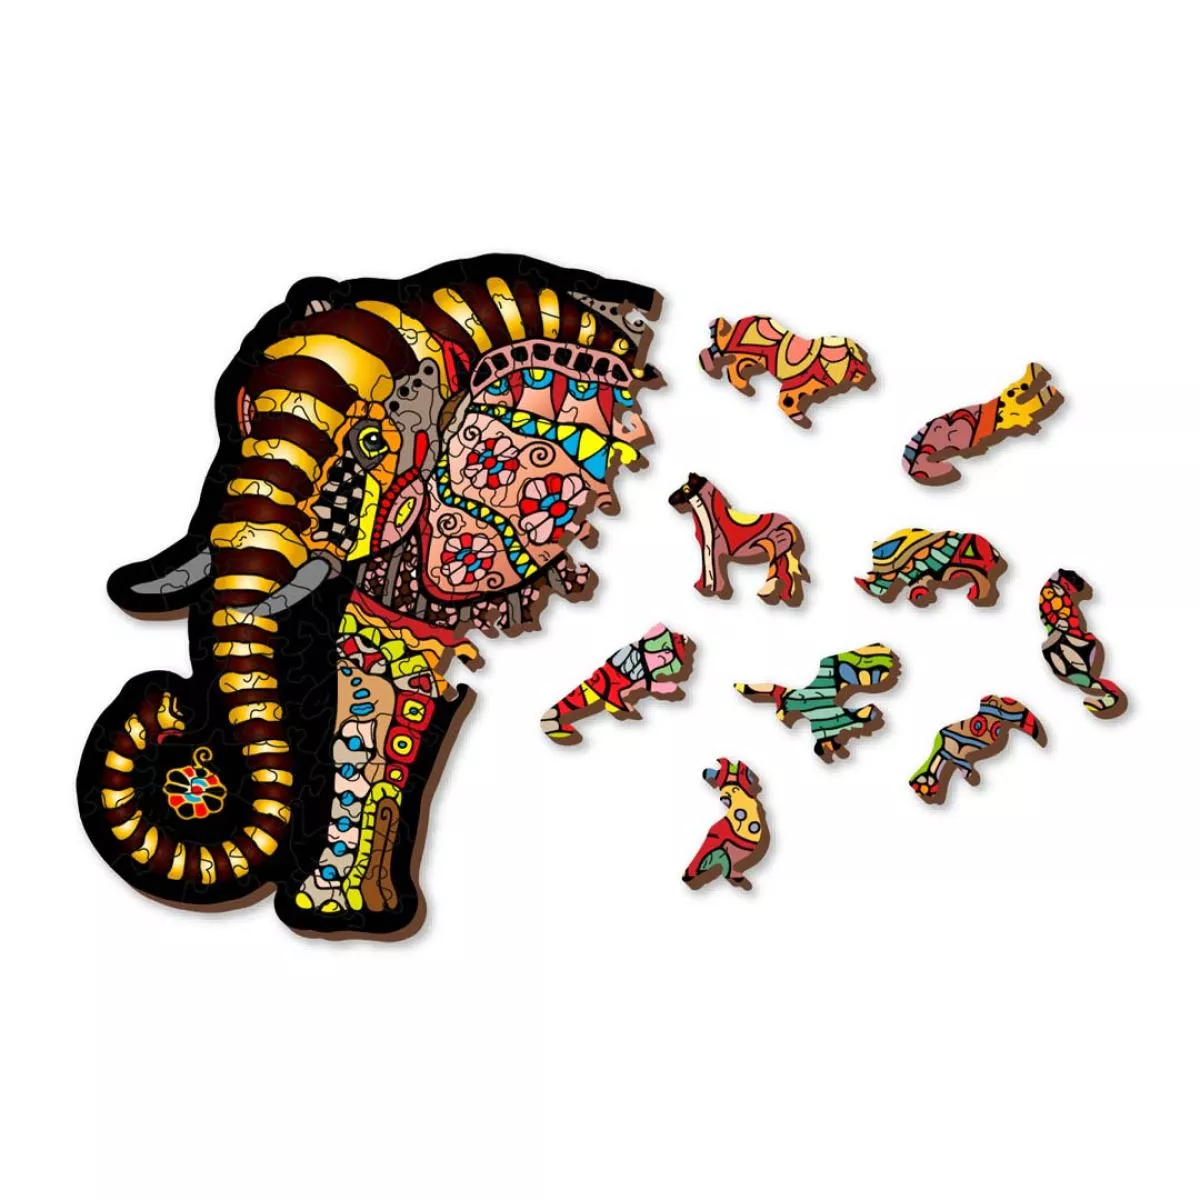 Colorful Puzzle "Magic Elephant" made of Wood – 150 parts, 30 shapes